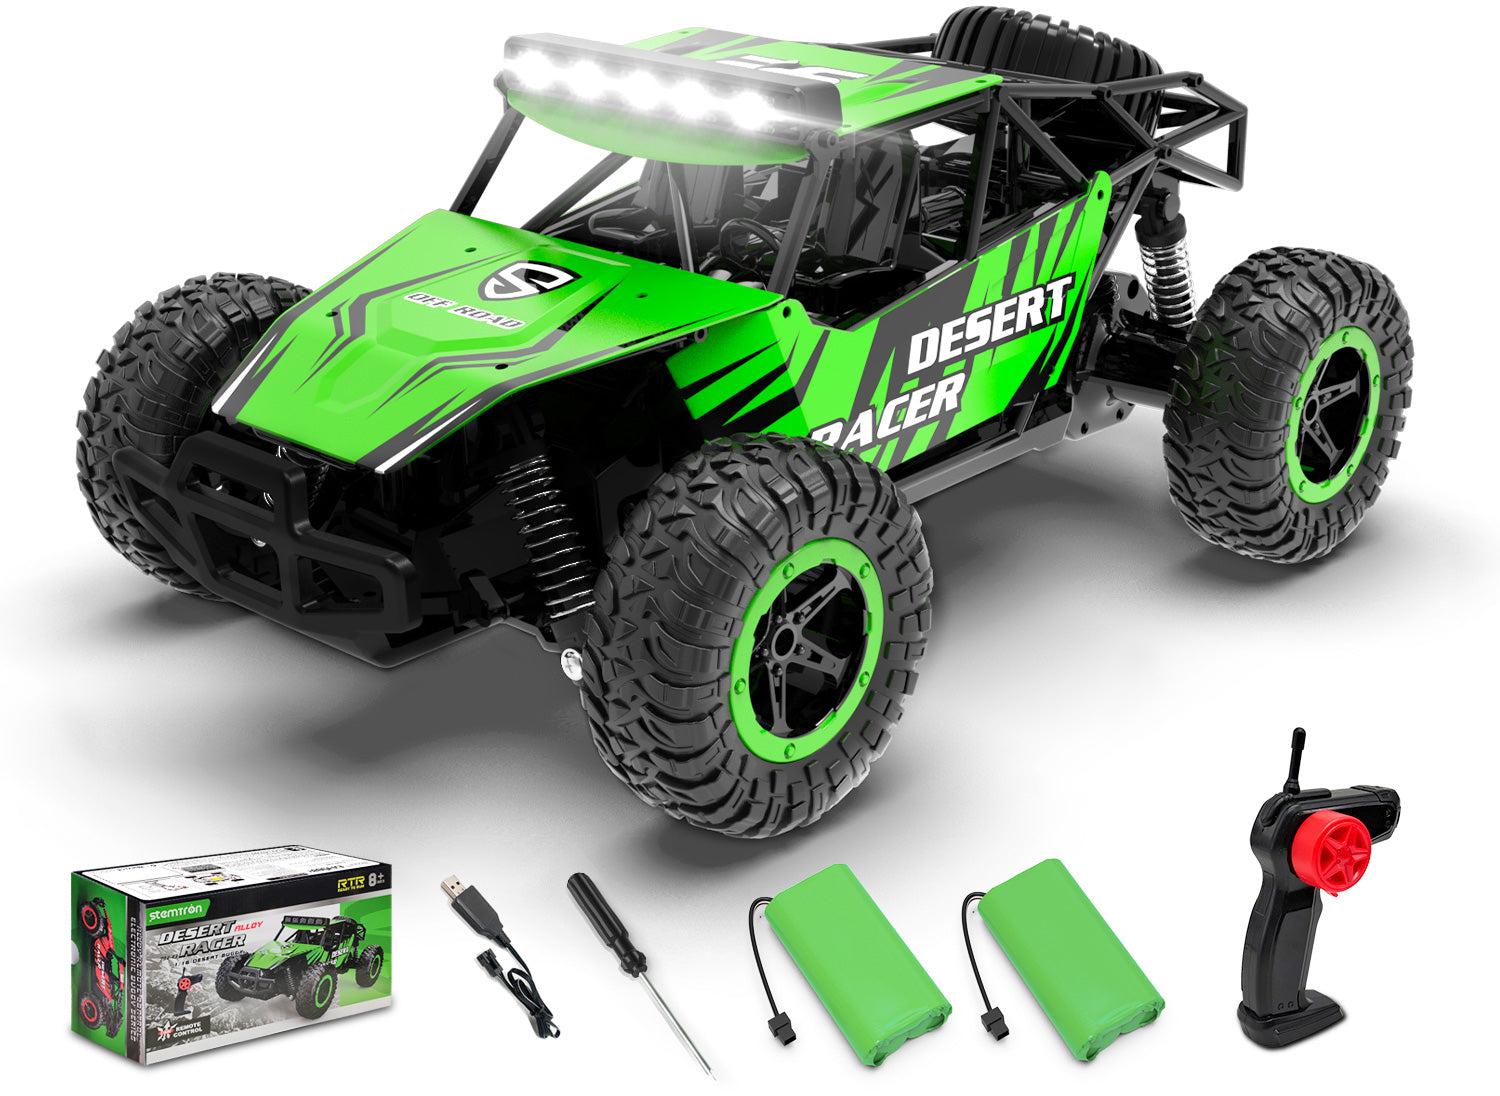 RACENT Remote Control Cars RC Monster Truck, RC Cars 1/16 Scale Toy Car for Adults Boys Kids Green